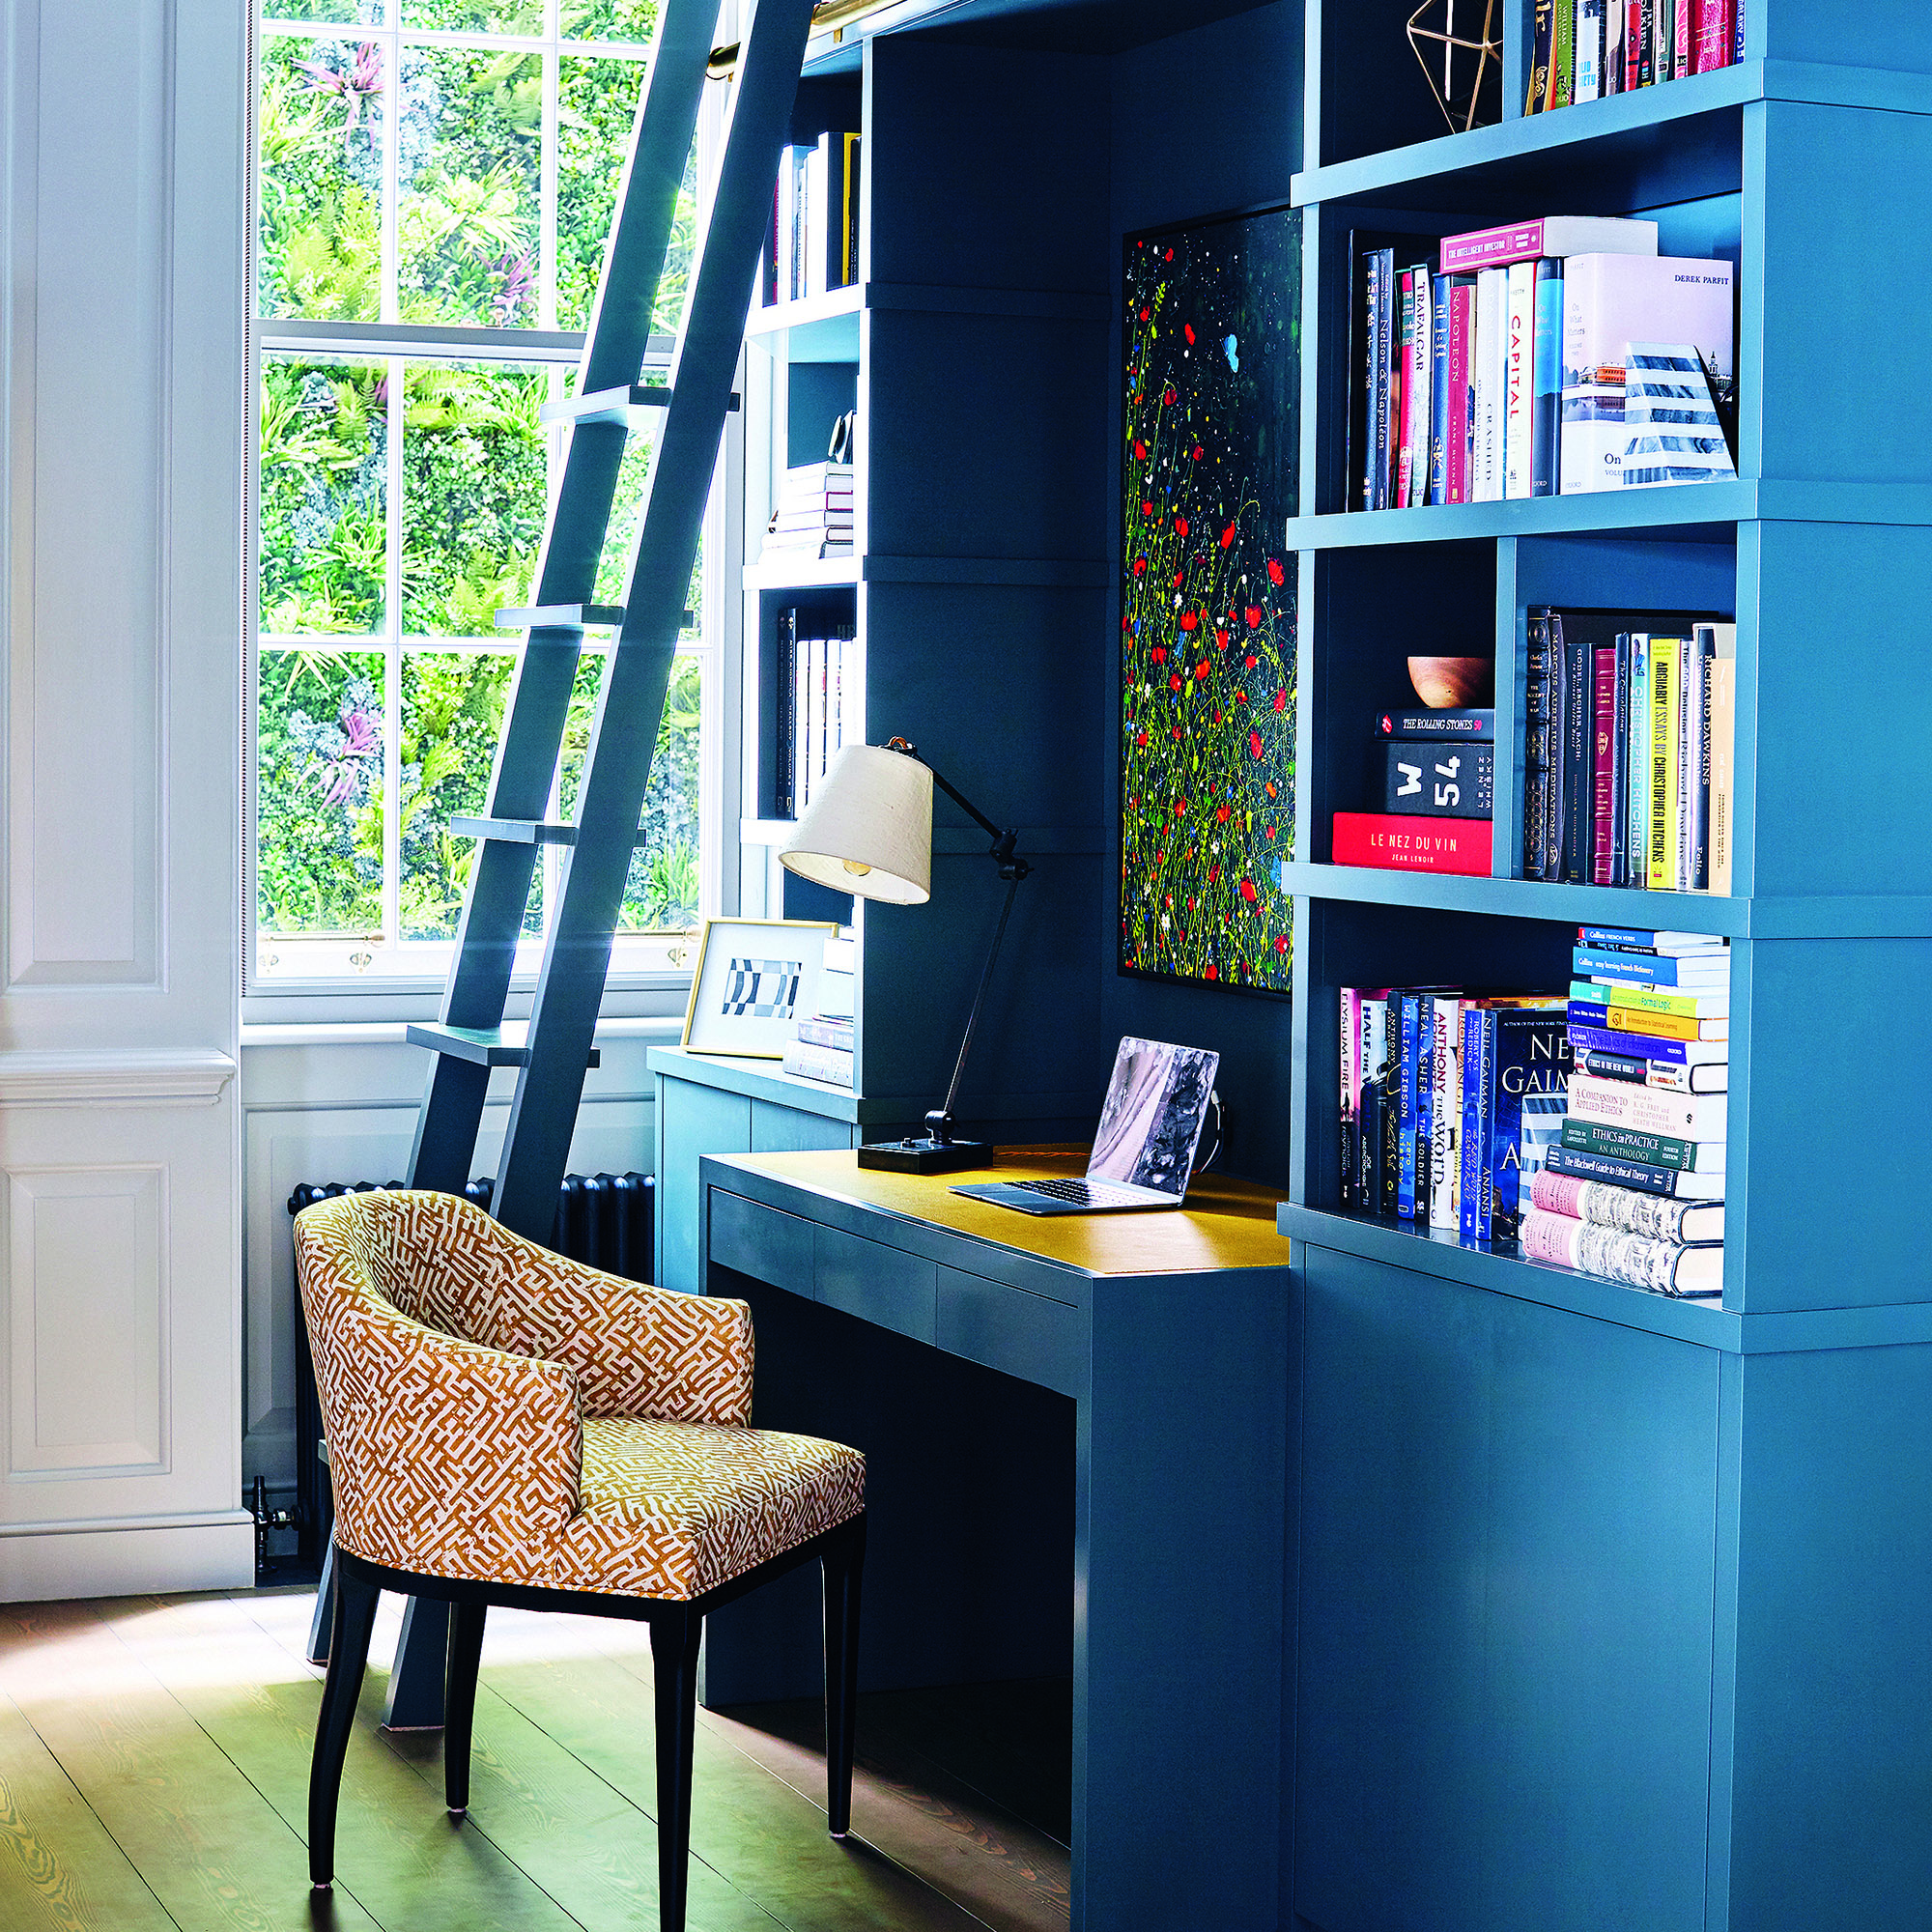 Home office with blue built in desk and shelving with wallpapered alcove.